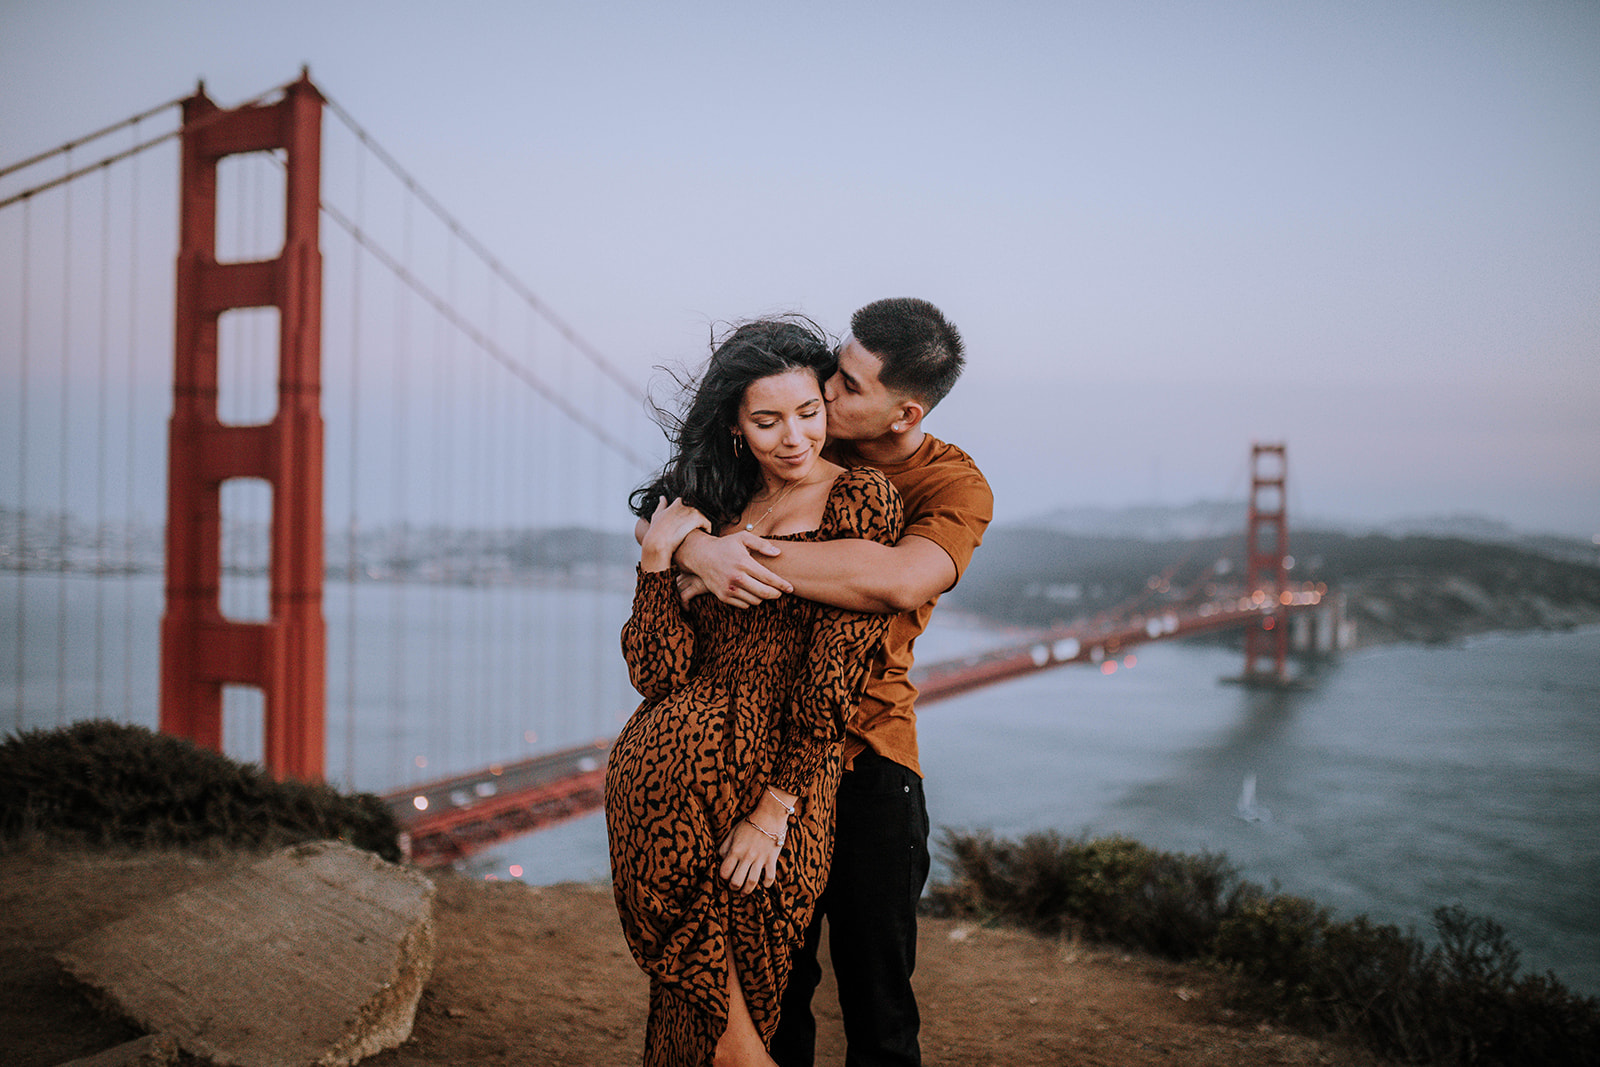 Golden Gate Bridge | San Francisco Couples Session by Anela Benavides Photography. Includes posing inspiration for an outdoor couples session. Book your couples session and browse the blog for more inspiration